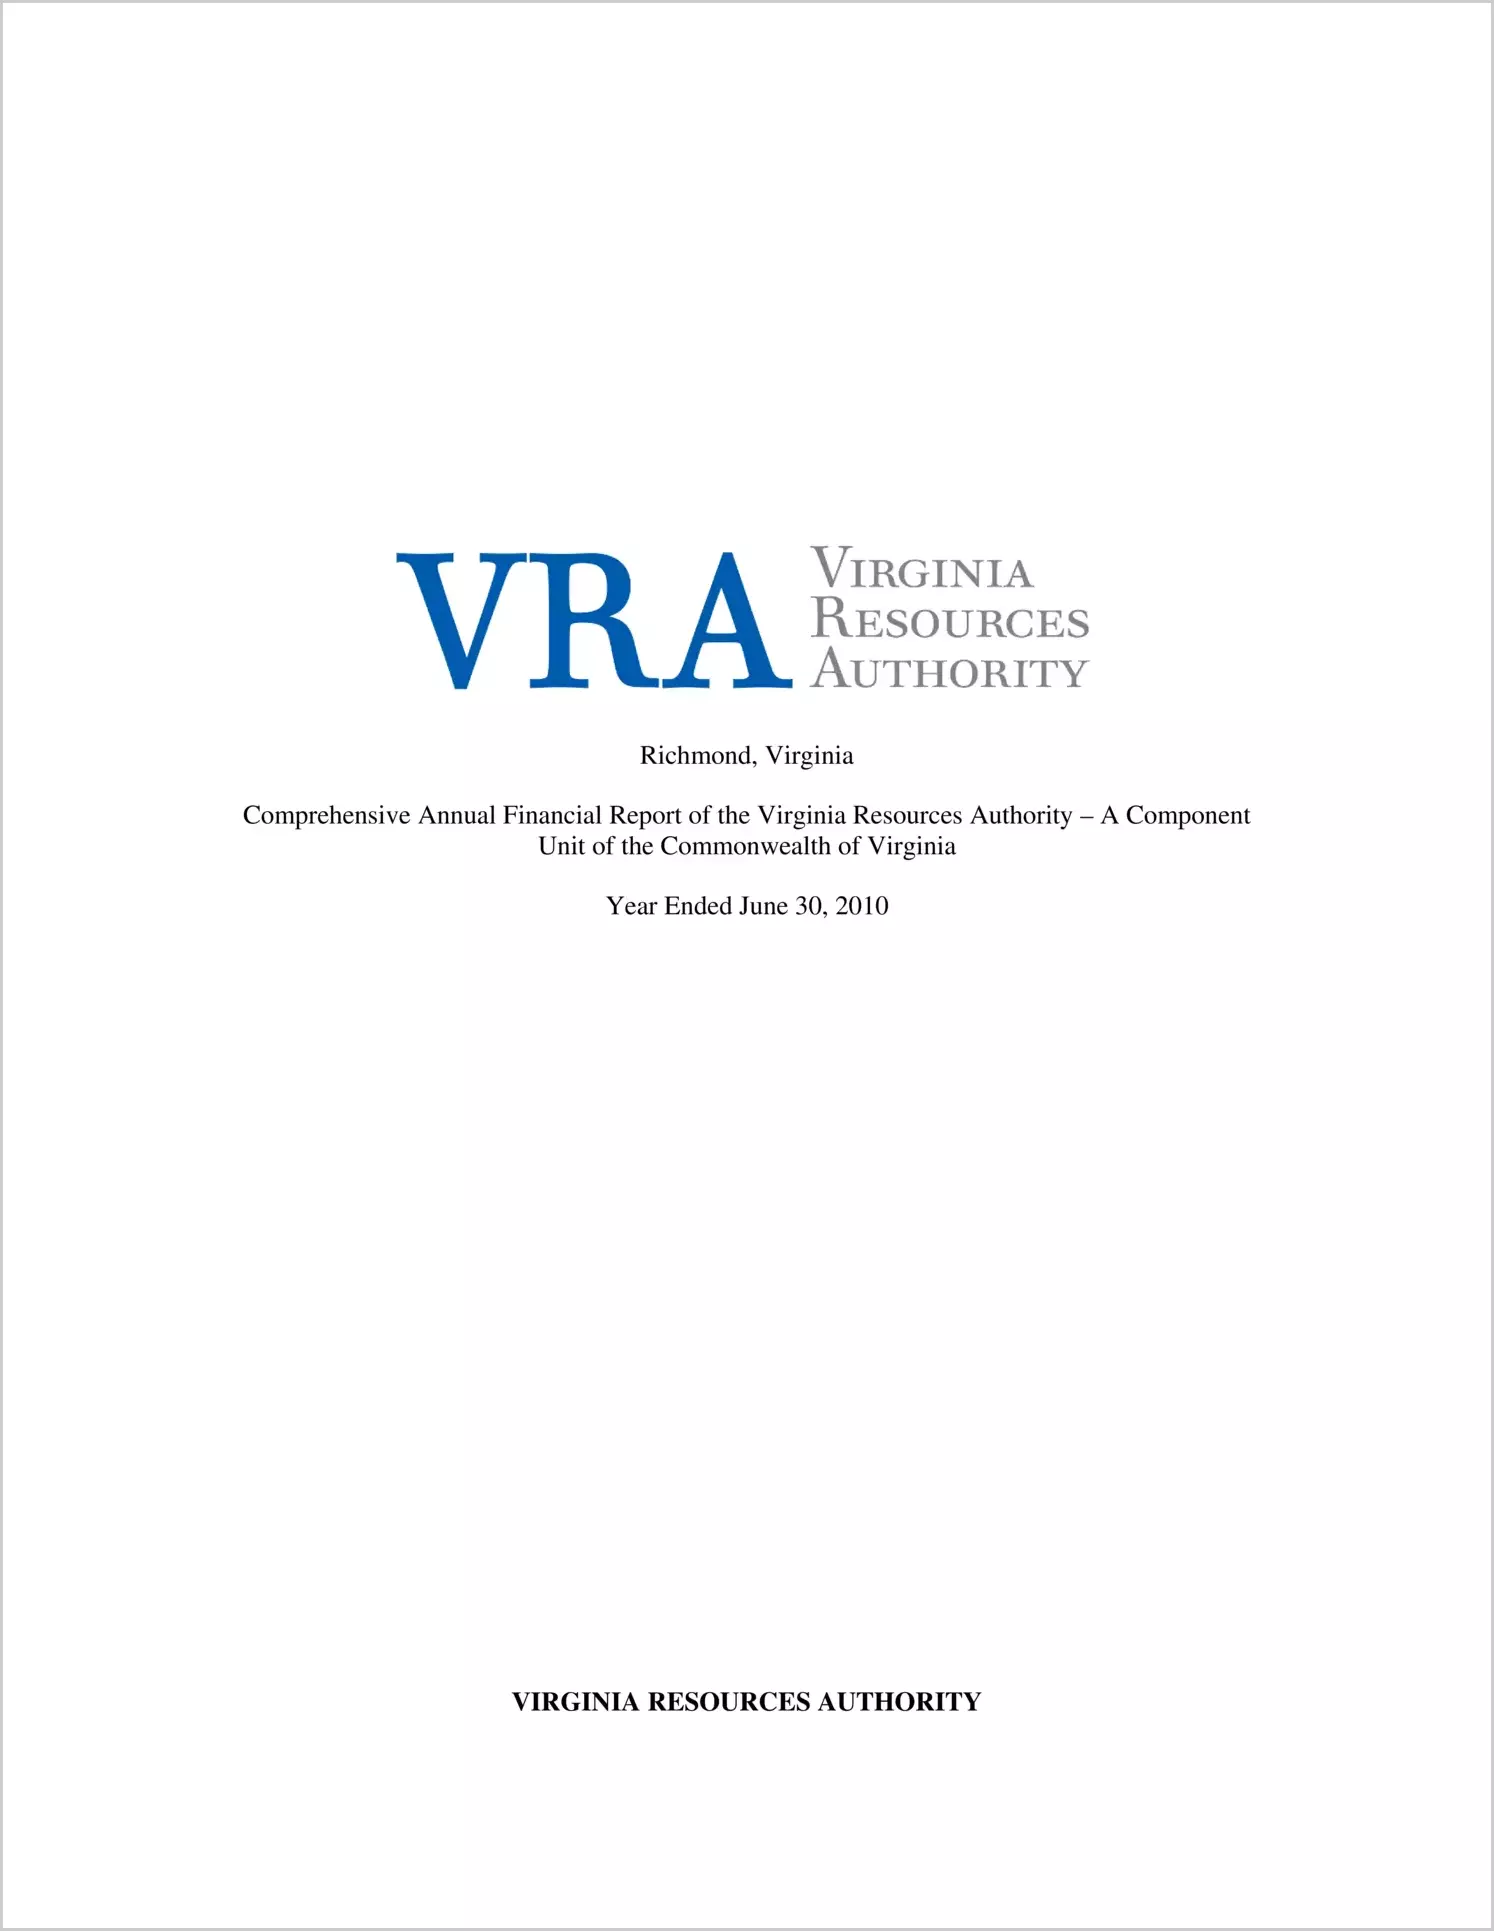 Virginia Resources Authority Financial Statements for the fiscal year ended June 30, 2010